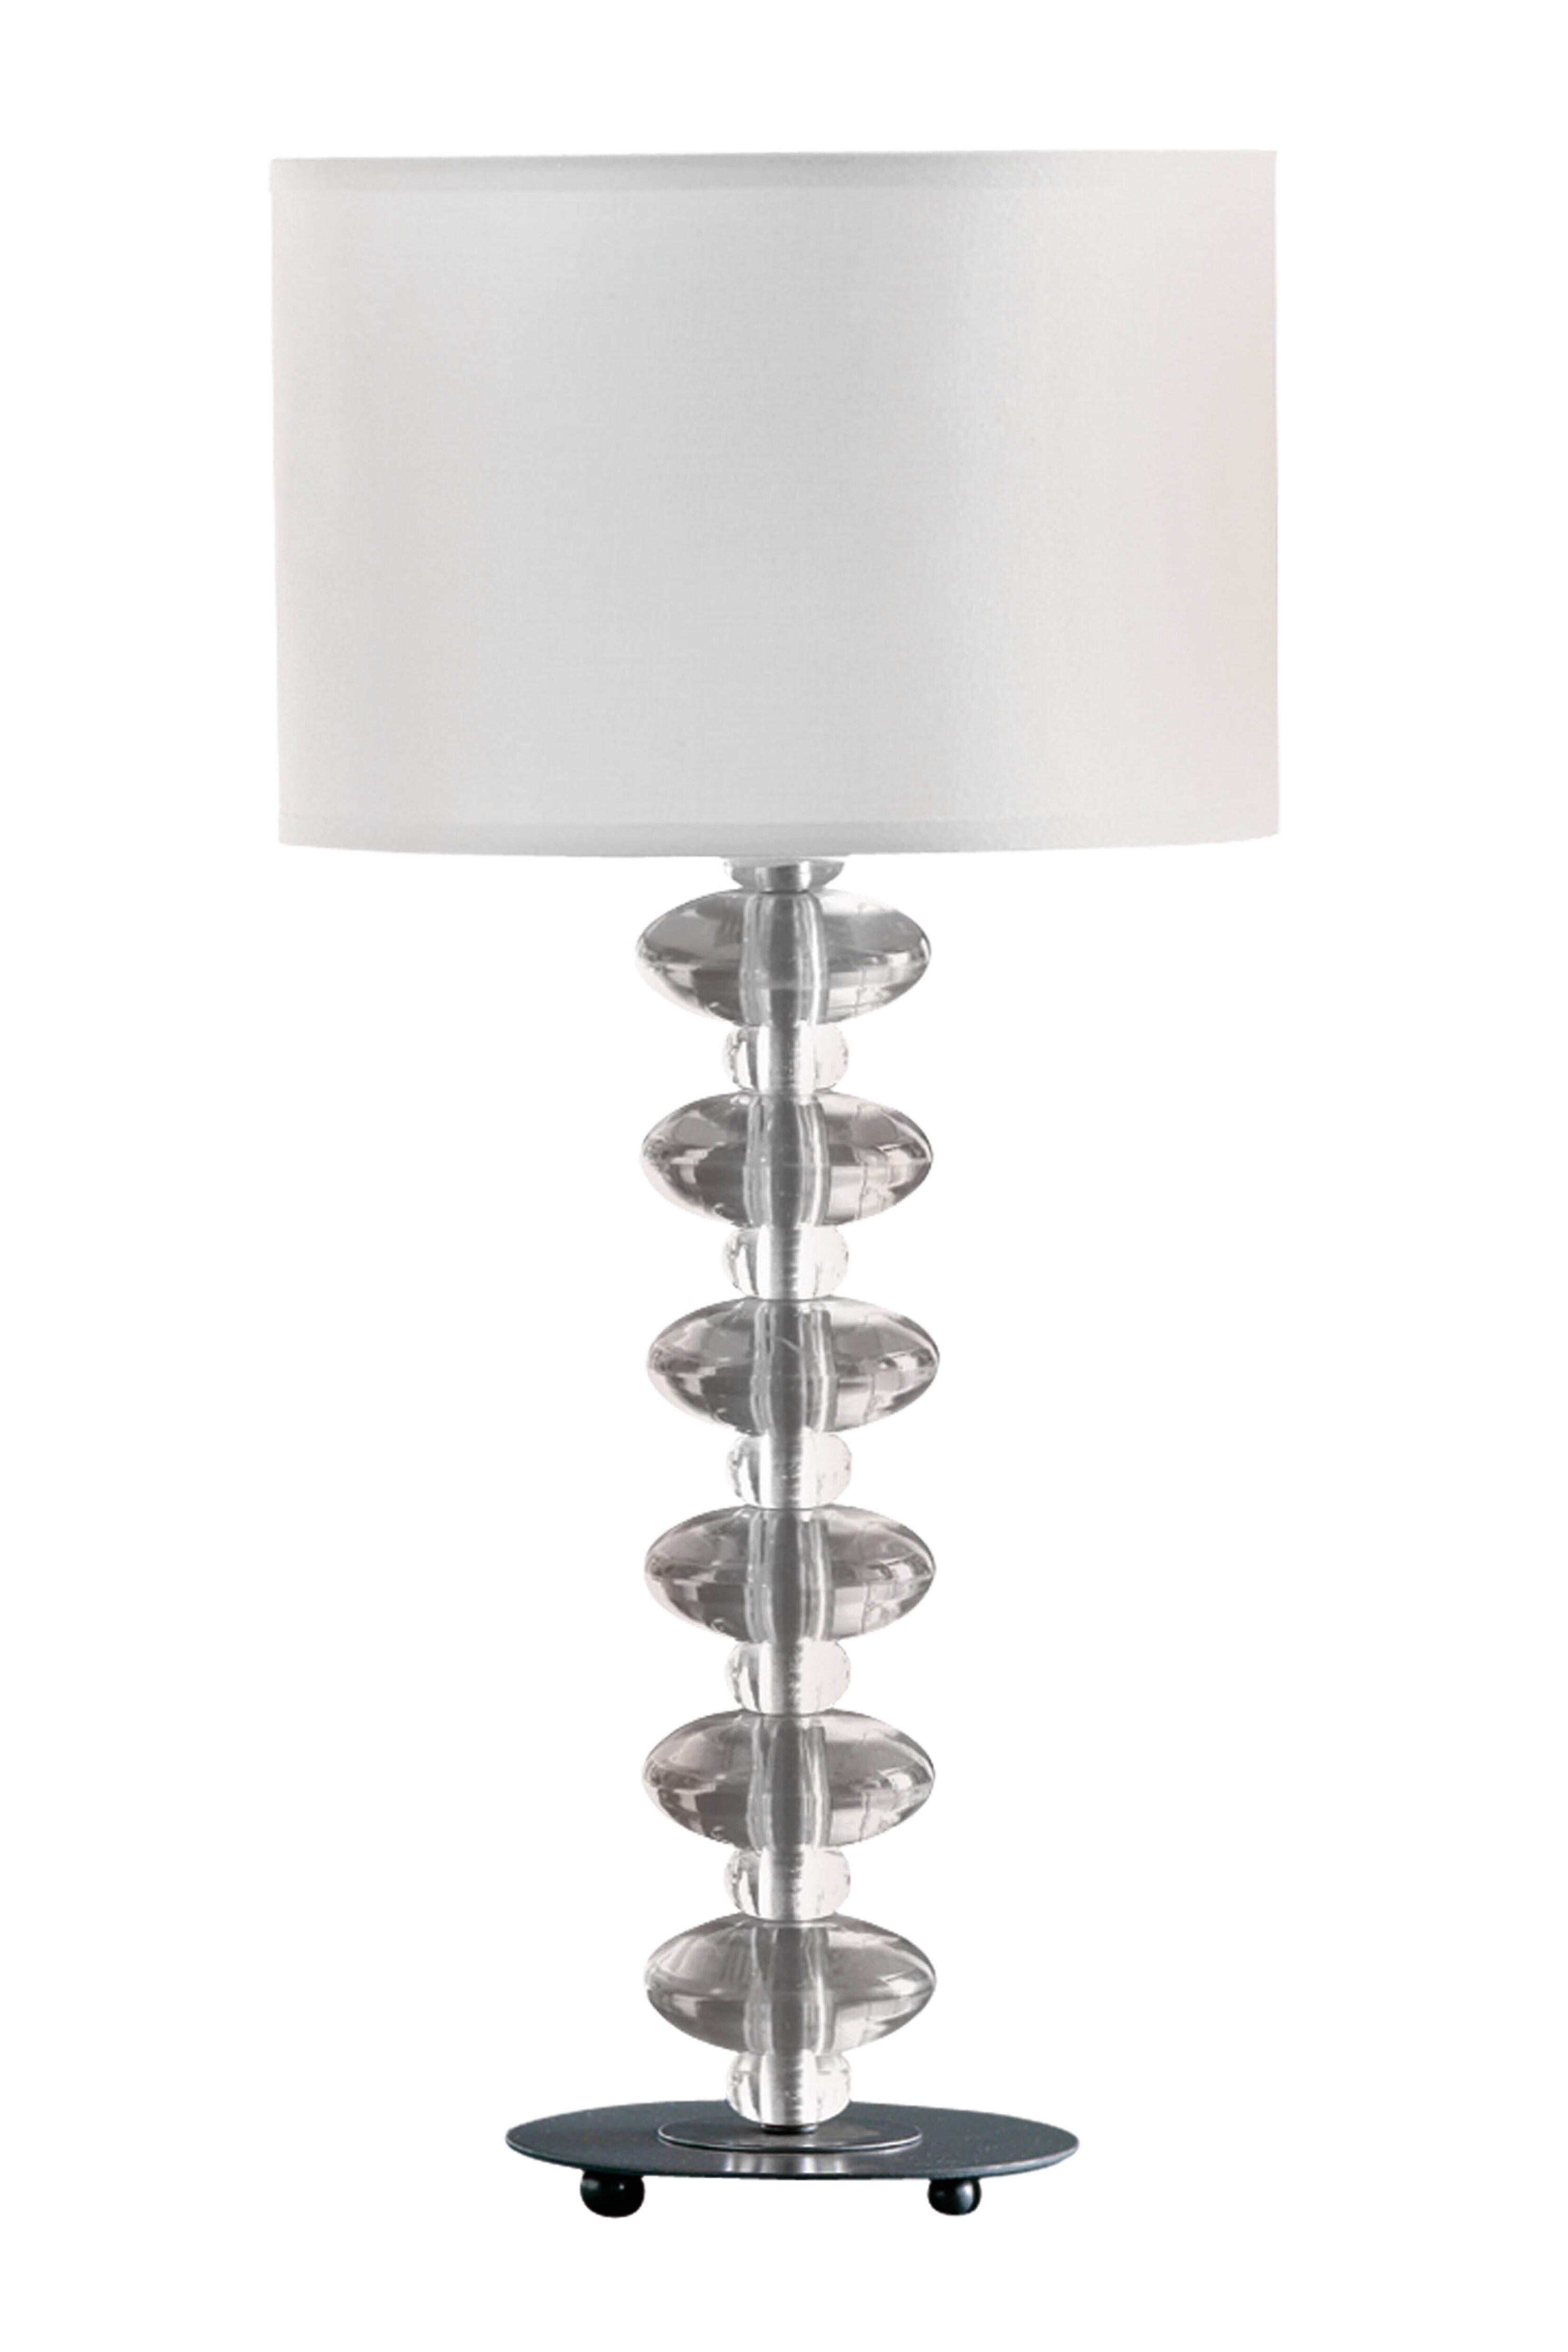 Interiors by Premier Bobble White Fabric Shade Lamp